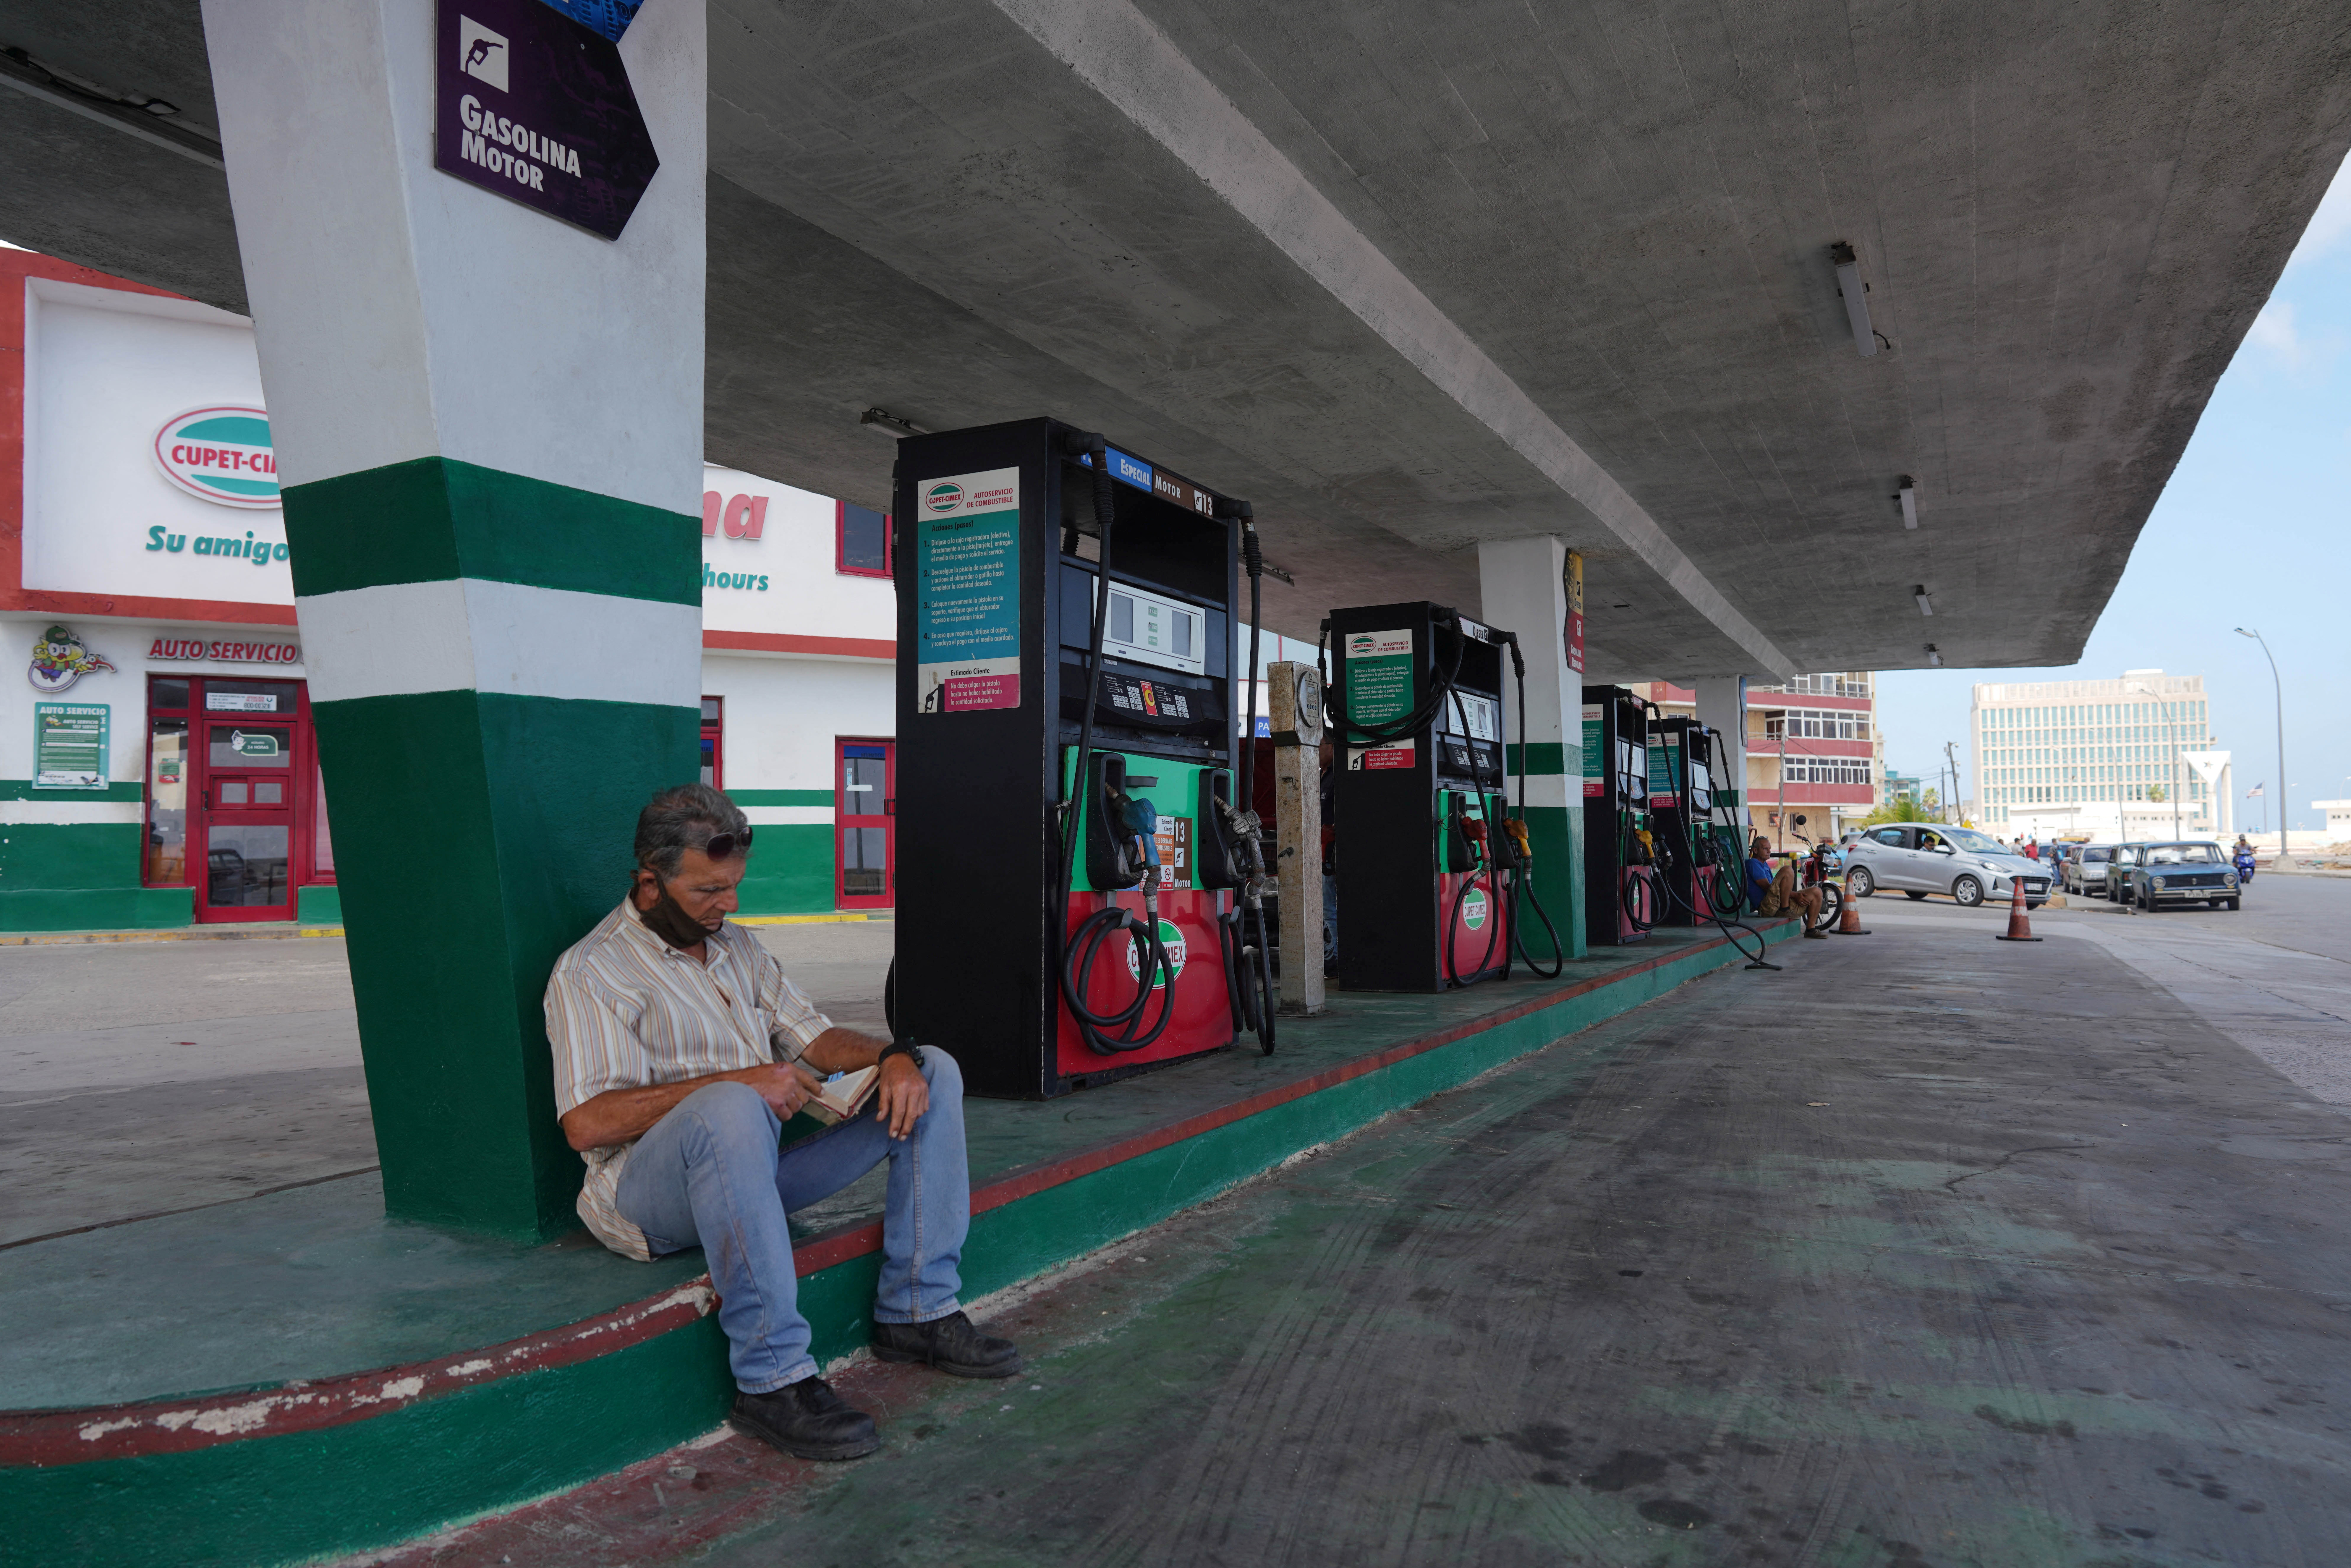 Jose Mesejo, 65, reads a book as he waits for electricity to fill up the tank of his motorbike at a gas station in Havana